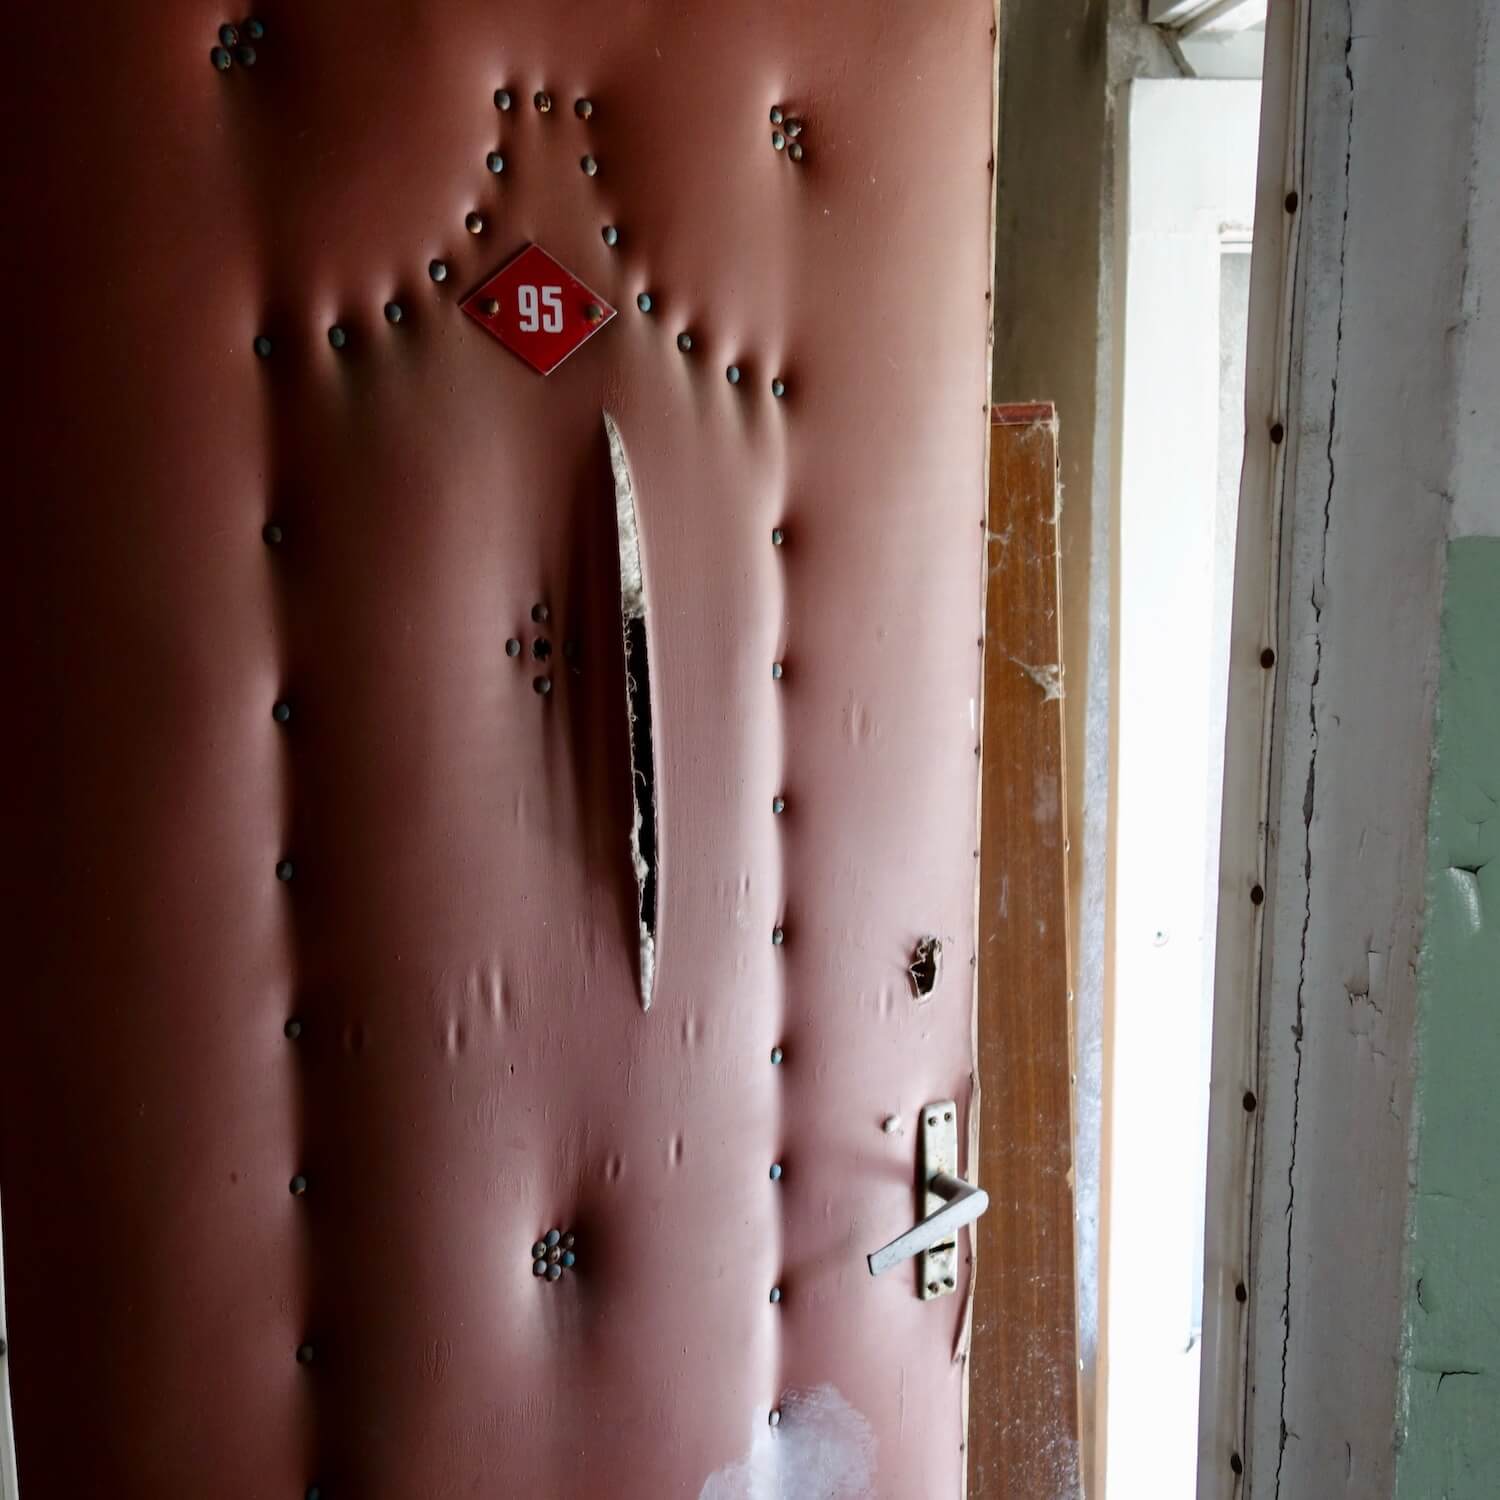 Door to apartment 95 in one of the housing complexes in the ghost town of Prypyat, which was abandoned following the April 1986 explosion of Chernobyl Reactor #4